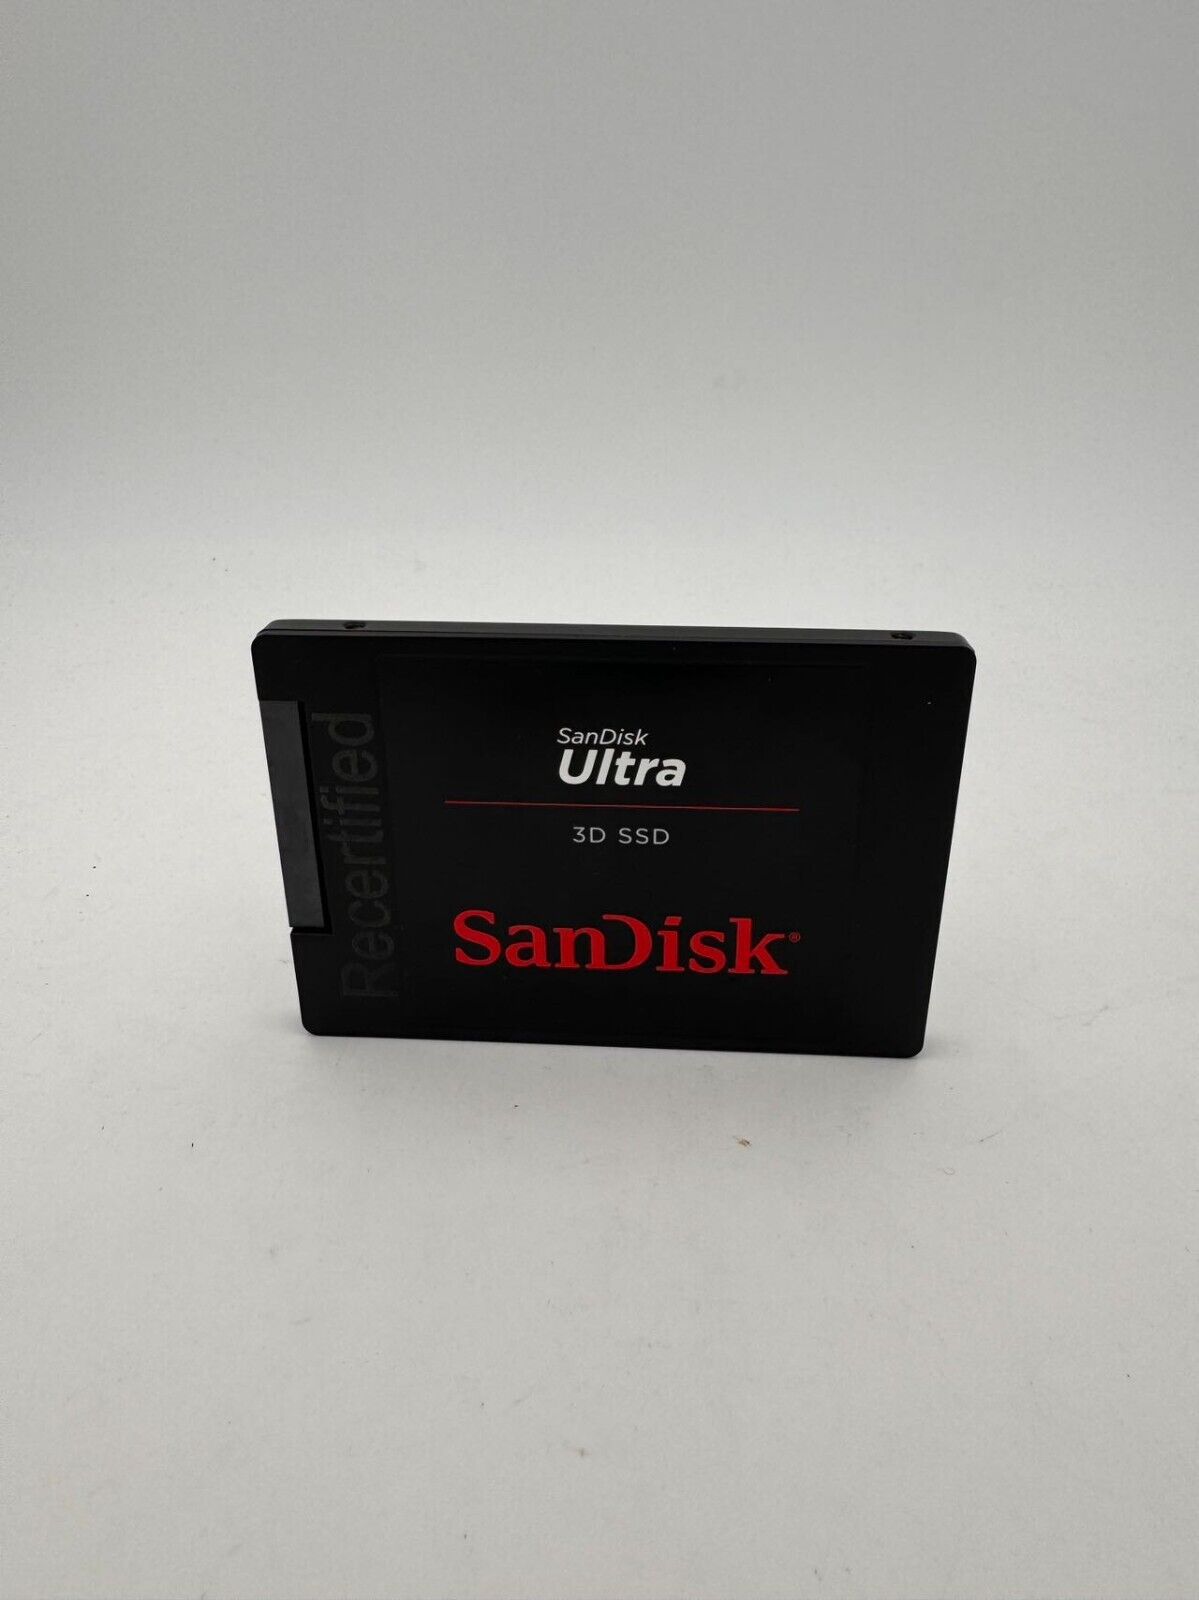 SanDisk 1TB ULTRA 3D SSD Internal Solid State Drive, SATA 6G/s (Re-certified)